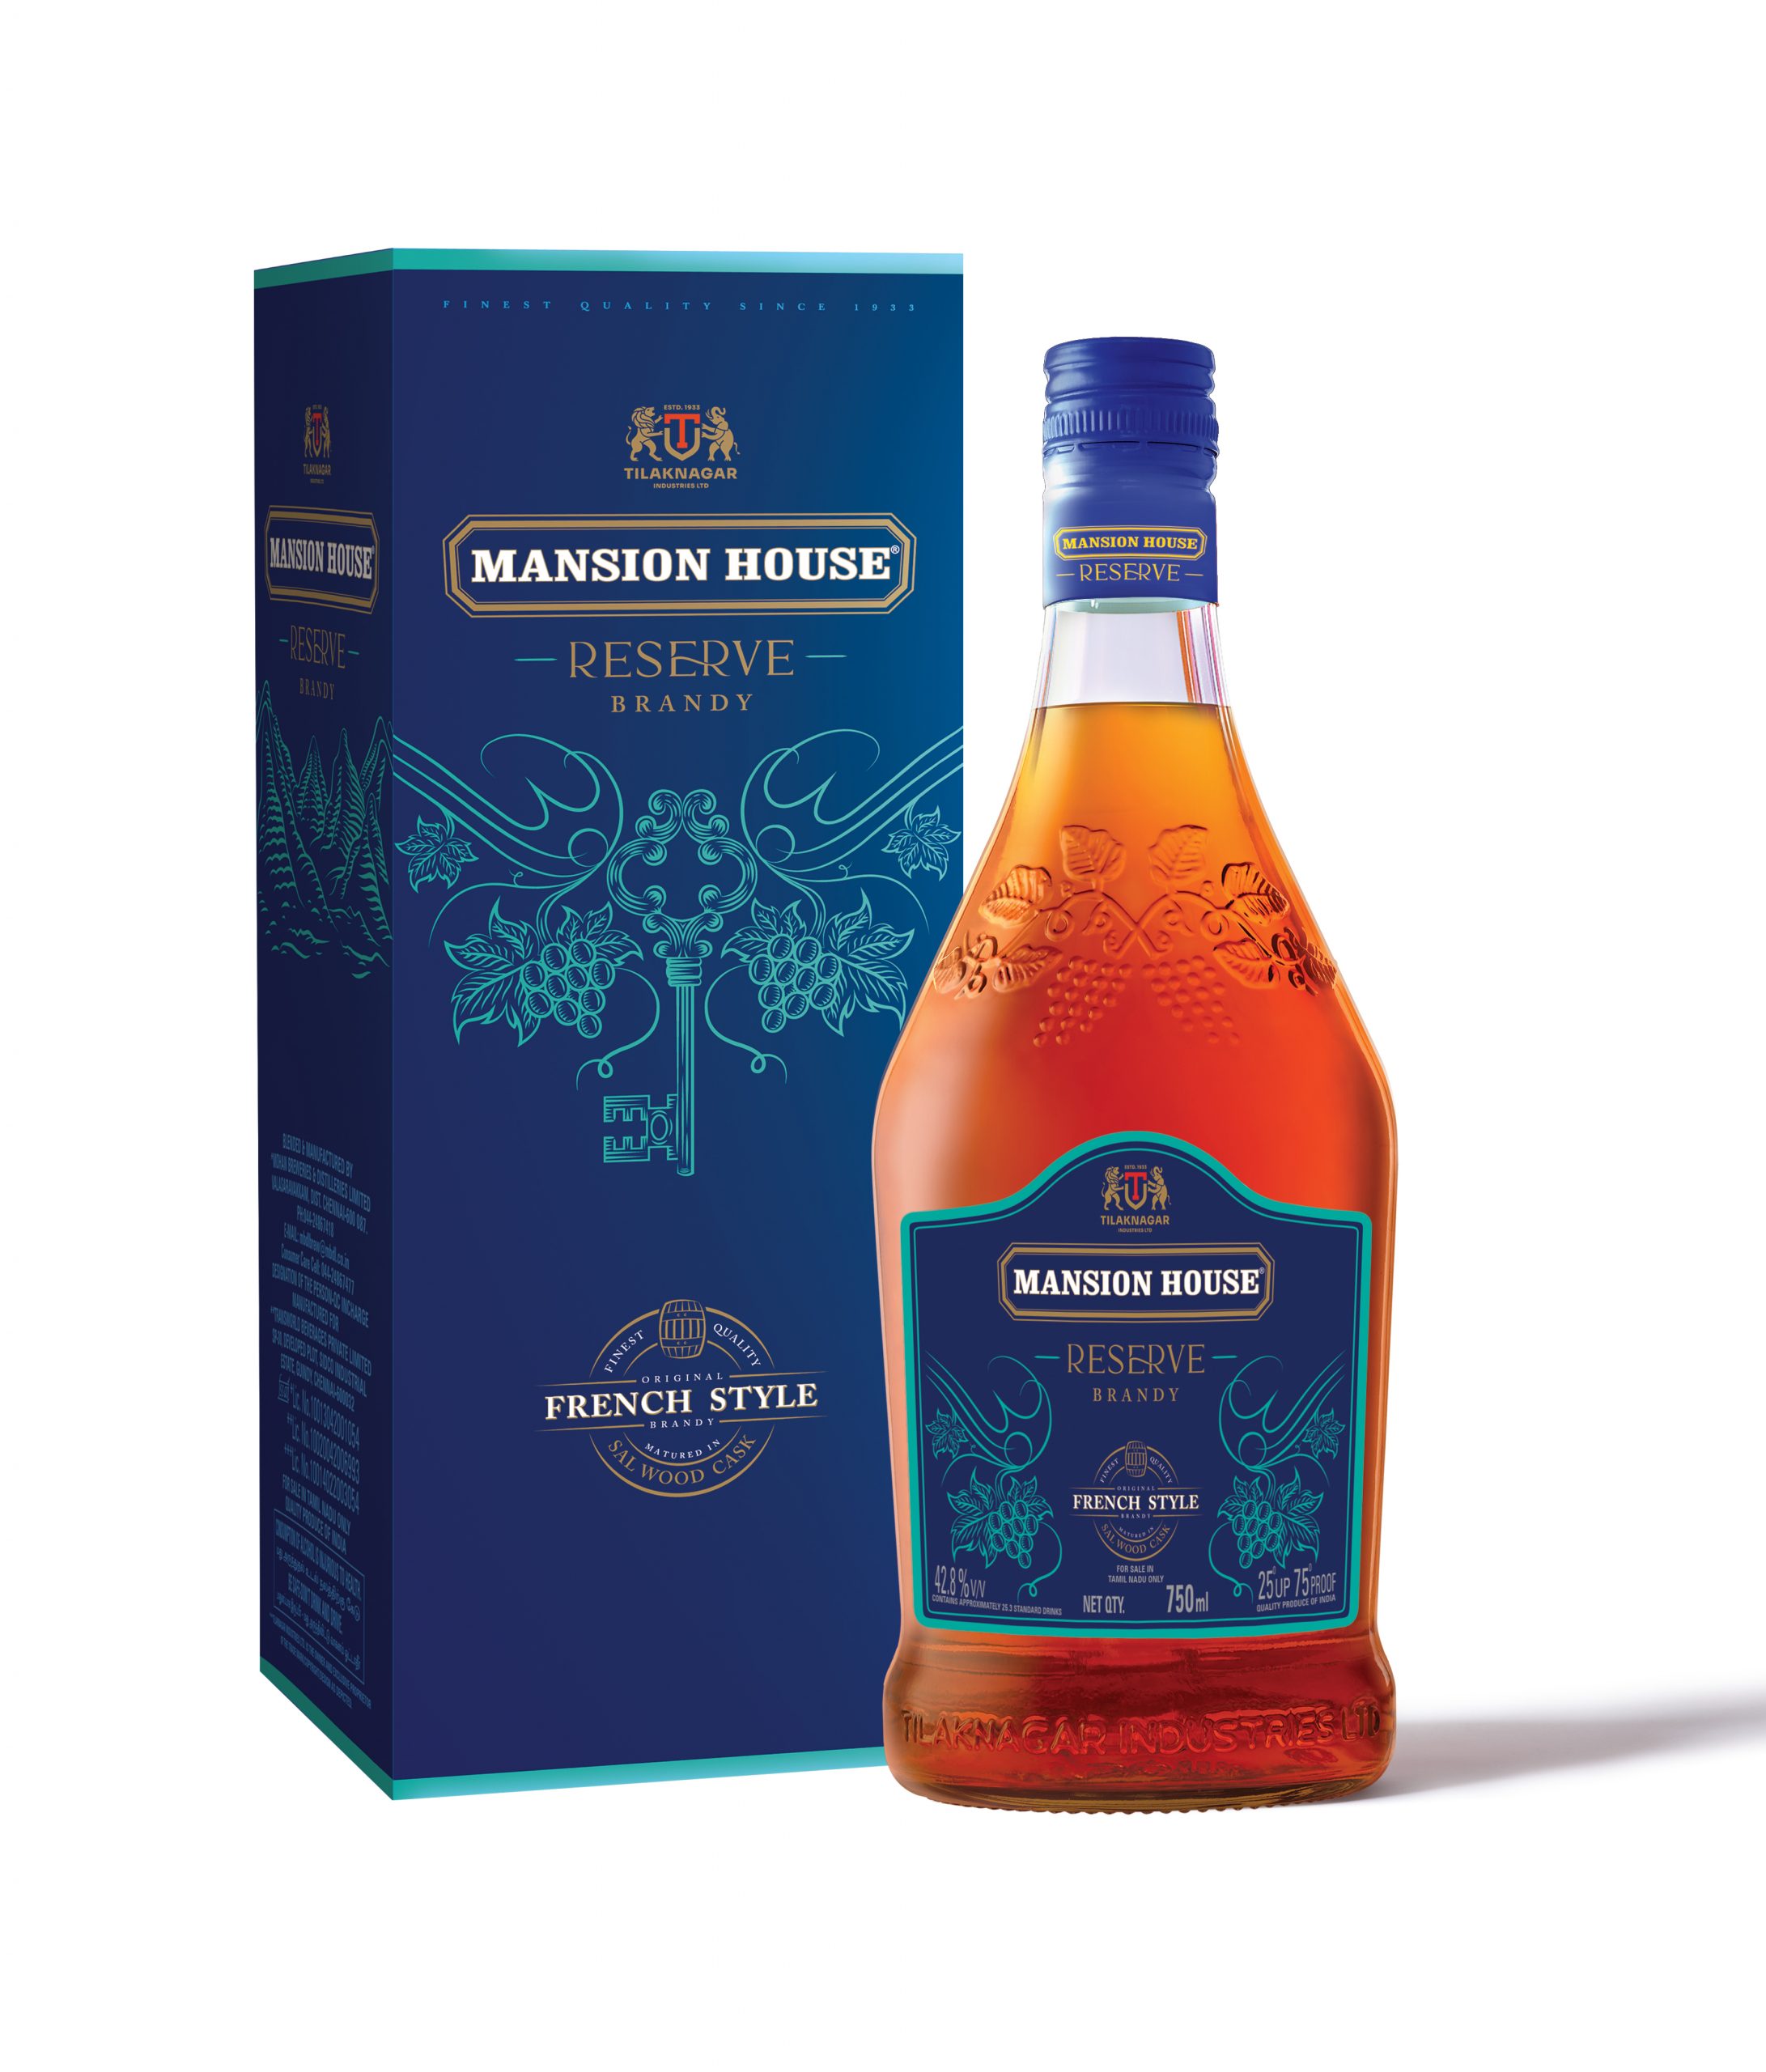 Tilaknagar Industries Launches Mansion House Reserve French Style Brandy 30